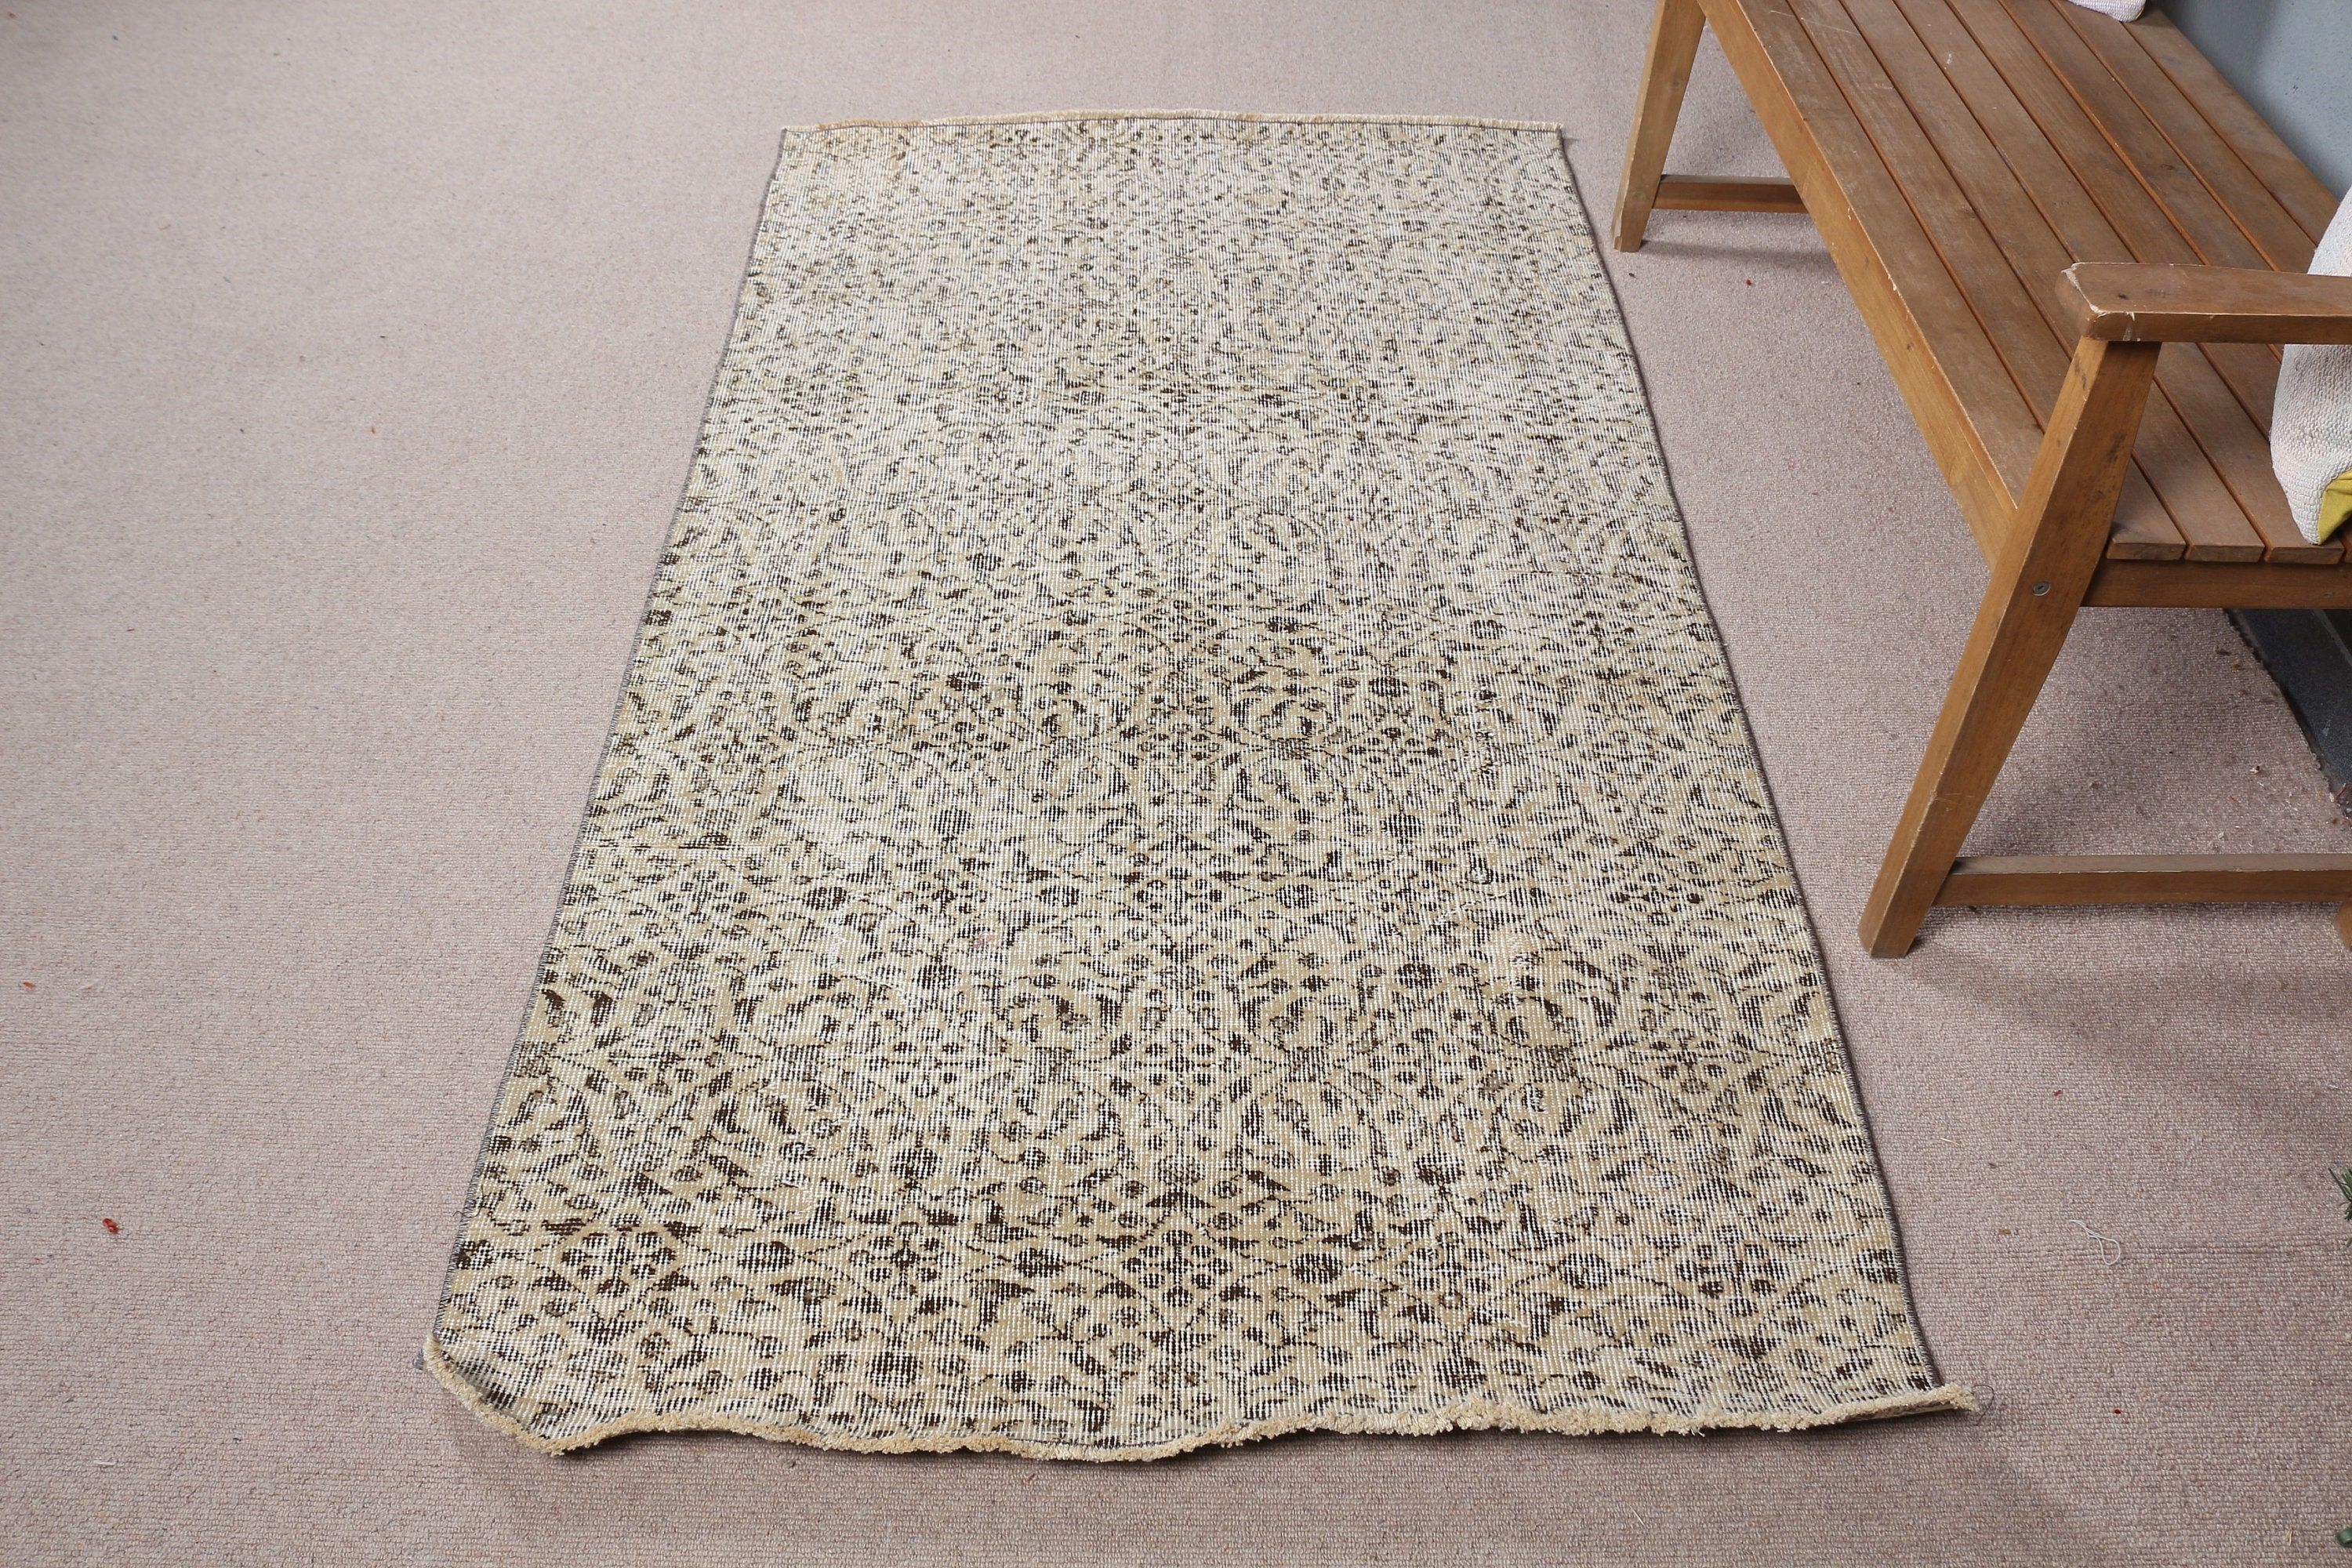 Pale Rugs, Vintage Rug, Entry Rugs, 3.6x6.5 ft Accent Rug, Turkish Rug, Rugs for Entry, Beige Kitchen Rugs, Home Decor Rug